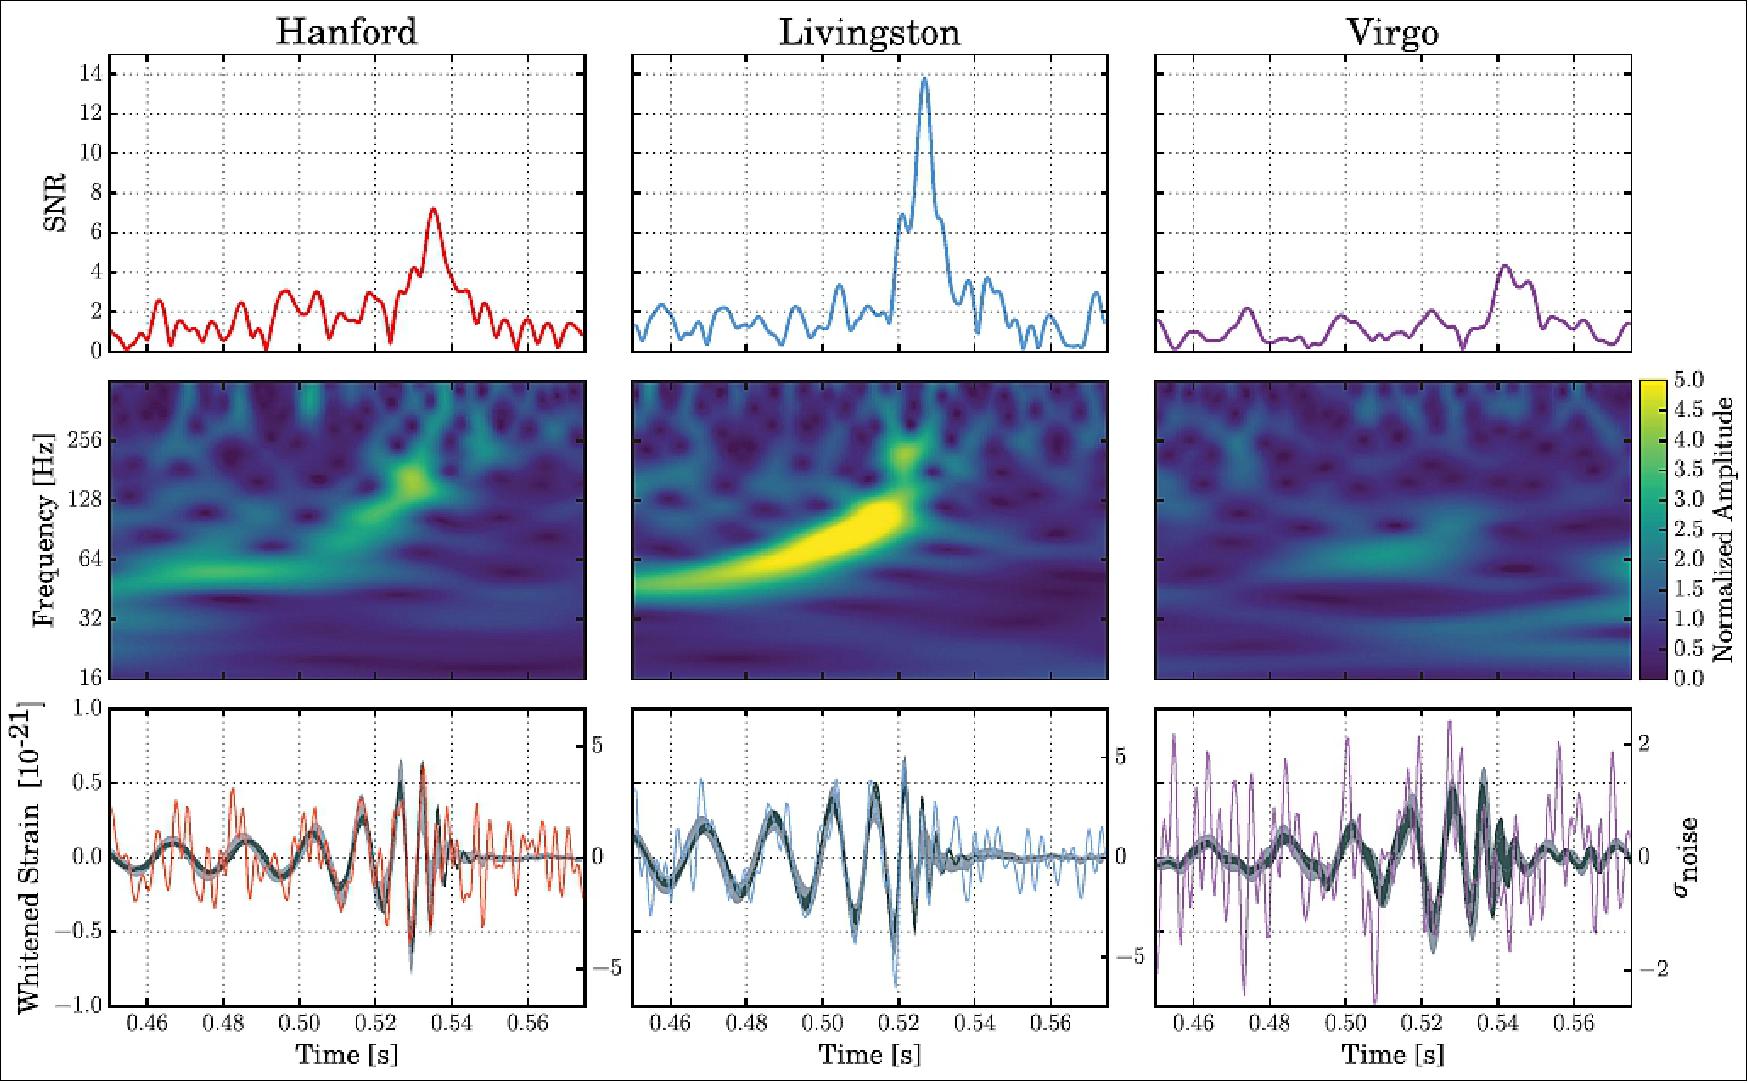 Figure 37: The GWevent GW170814 observed by LIGO Hanford, LIGO Livingston, and Virgo. Times are shown from August 14, 2017, 10:30:43 UTC. Top row: SNR time series produced in low latency and used by the low-latency localization pipeline on August 14, 2017. The time series were produced by time shifting the best-match template from the online analysis and computing the integrated SNR at each point in time. The single-detector SNRs in Hanford, Livingston, and Virgo are 7.3, 13.7, and 4.4, respectively. Second row: Time-frequency representation of the strain data around the time of GW170814. Bottom row: Time-domain detector data (in color), and 90% confidence intervals for waveforms reconstructed from a morphology-independent wavelet analysis (light gray) and BBH (Binary Black Hole) models (image credit: LIGO and Virgo Collaboration)